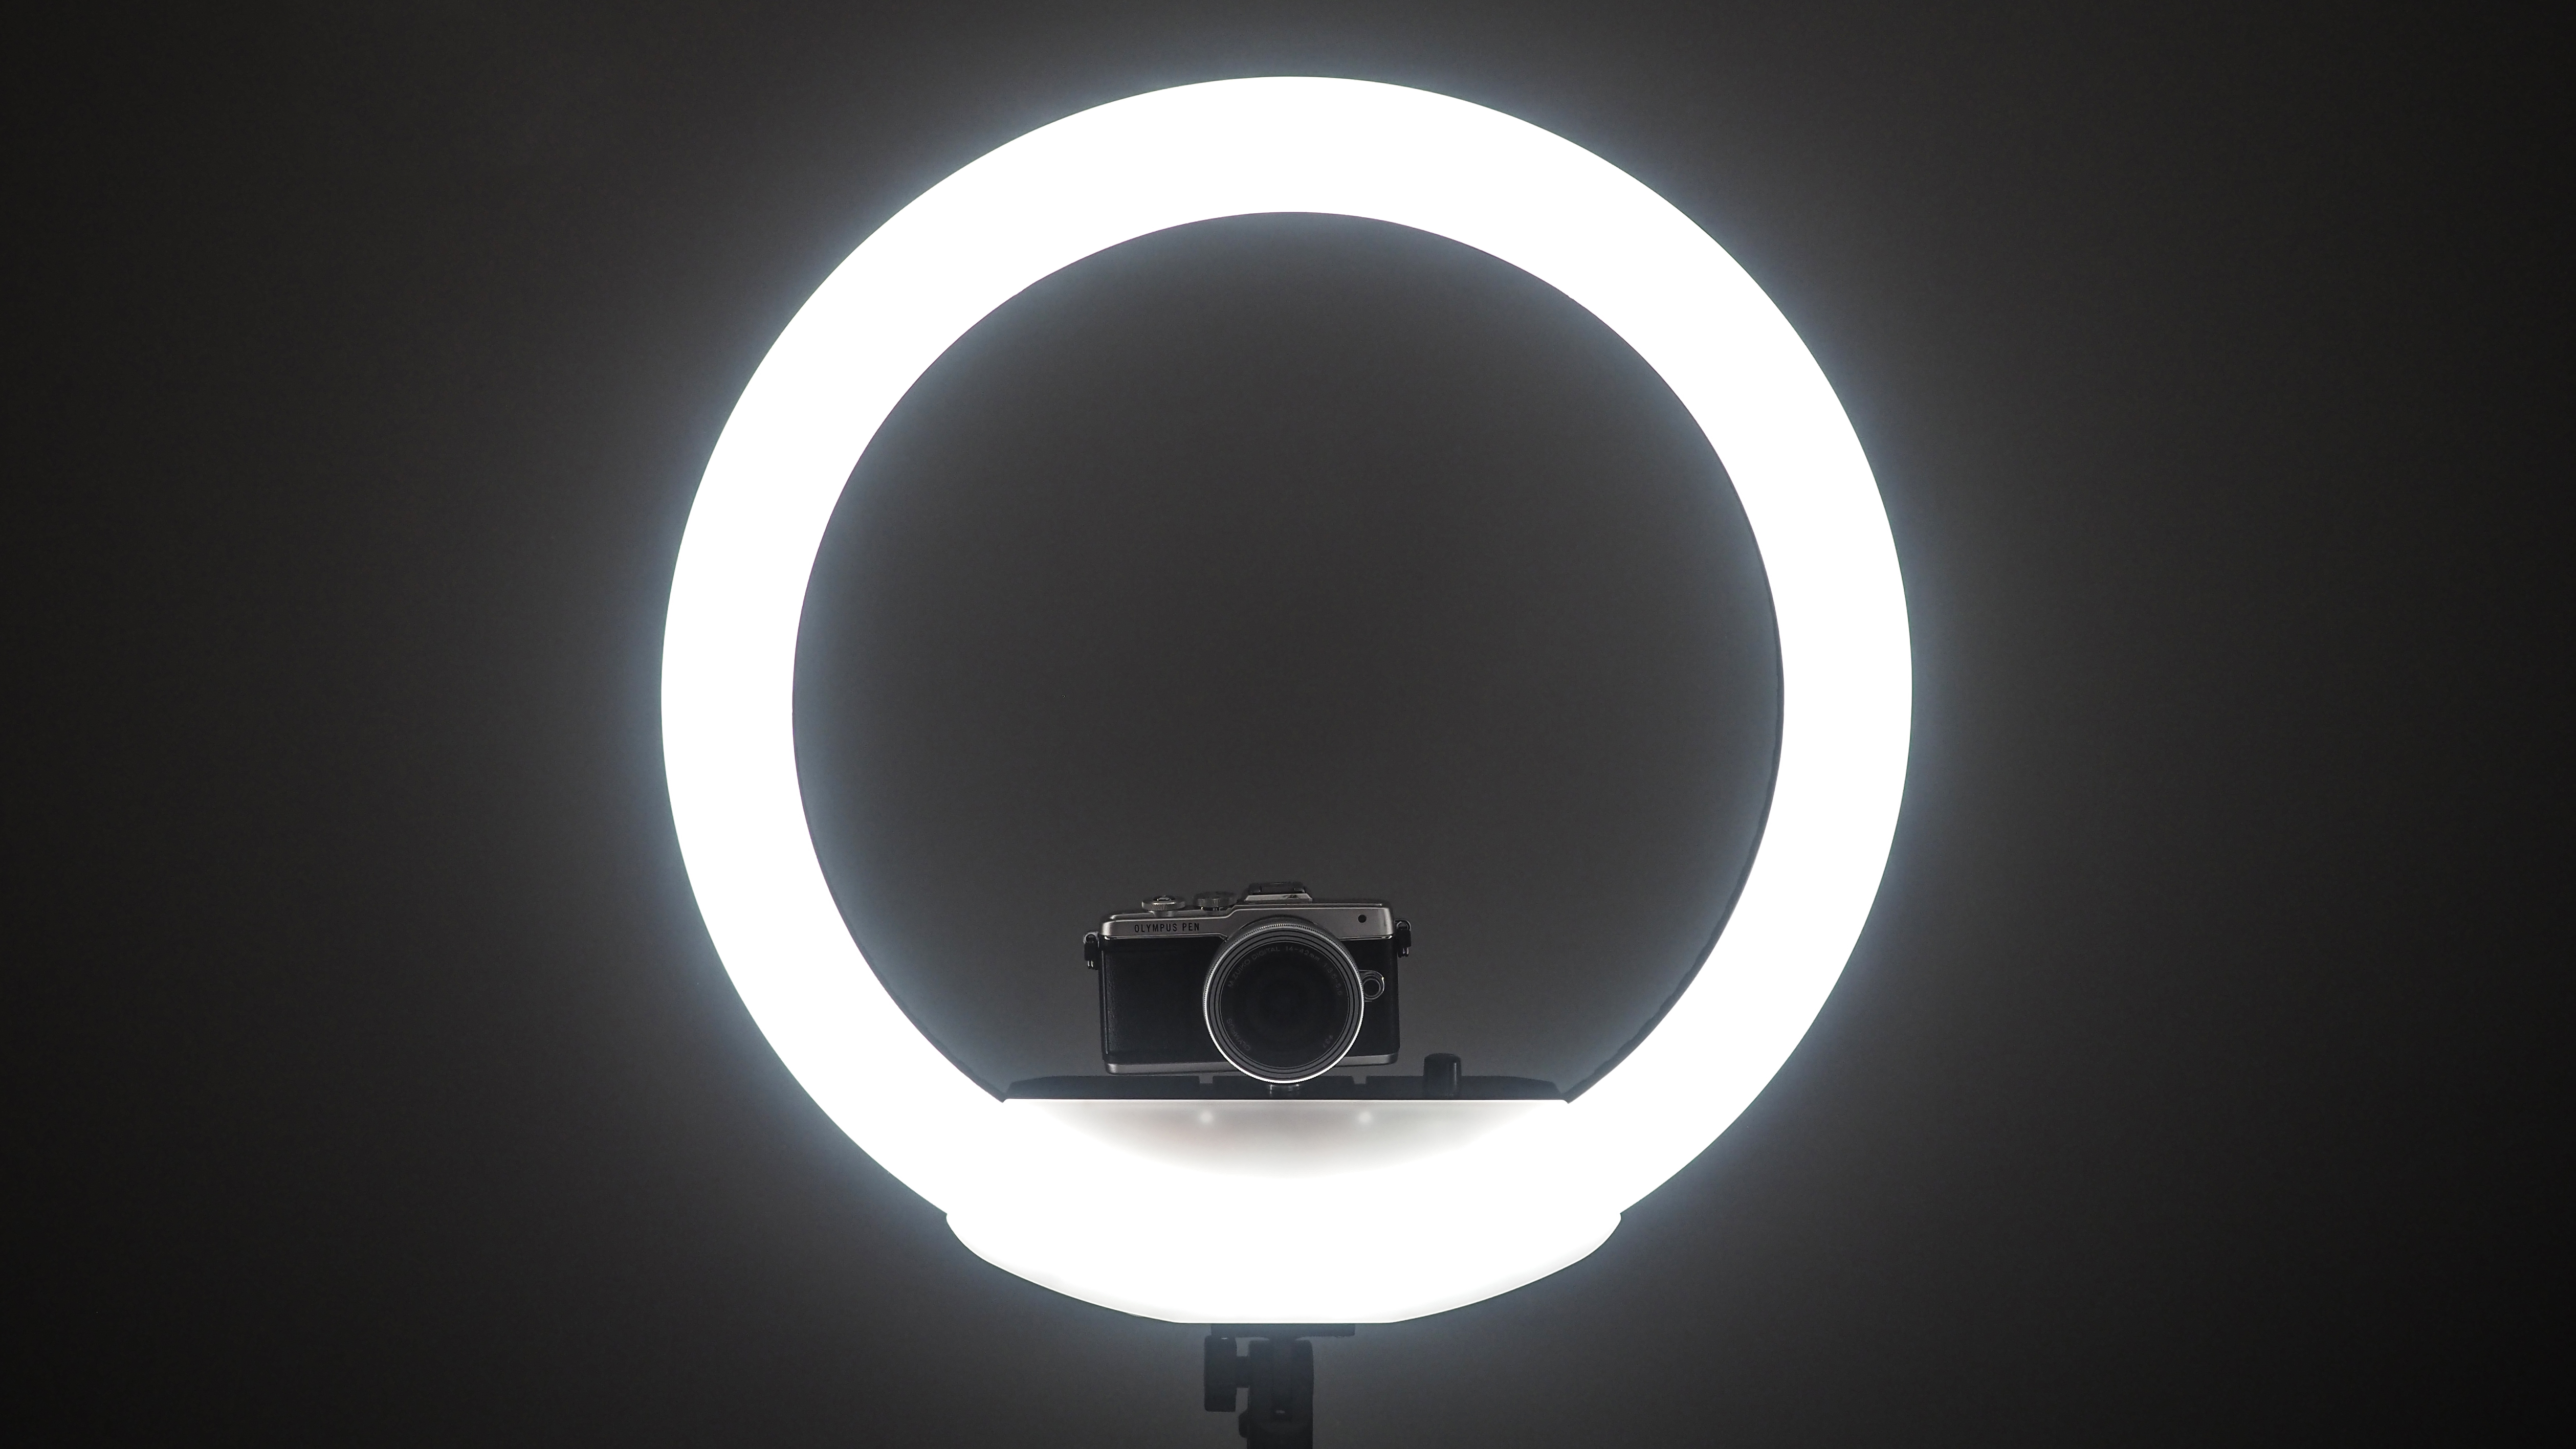 Wireless 18'' Ring Light (The Complete Kit)